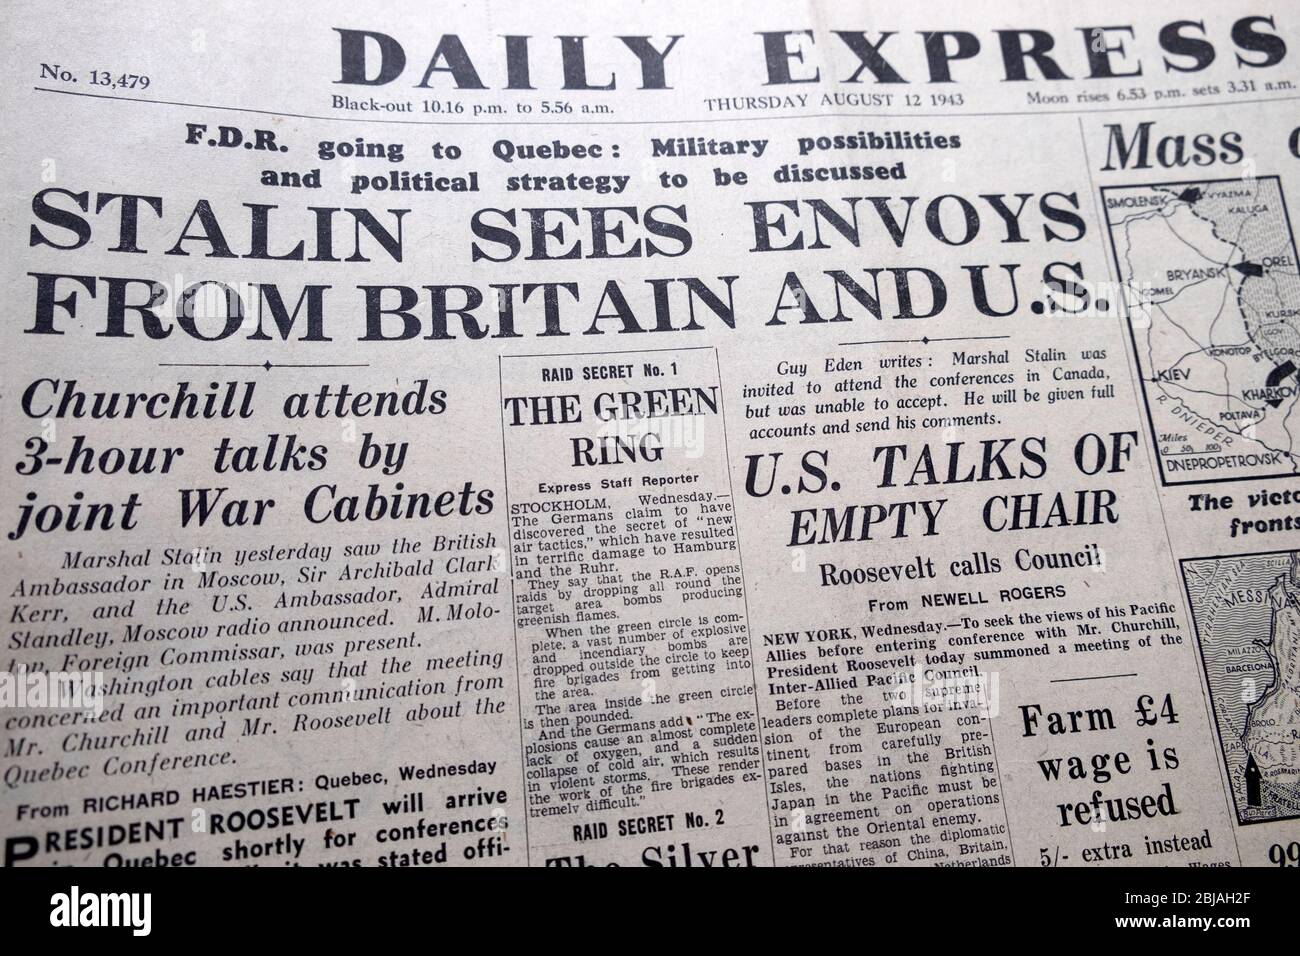 Daily Express newspaper headline World War 2 'Stalin Sees Envoys From Britain and U.S.' 'Churchill...talks by joint War Cabinets 12 Aug 1943 London UK Stock Photo